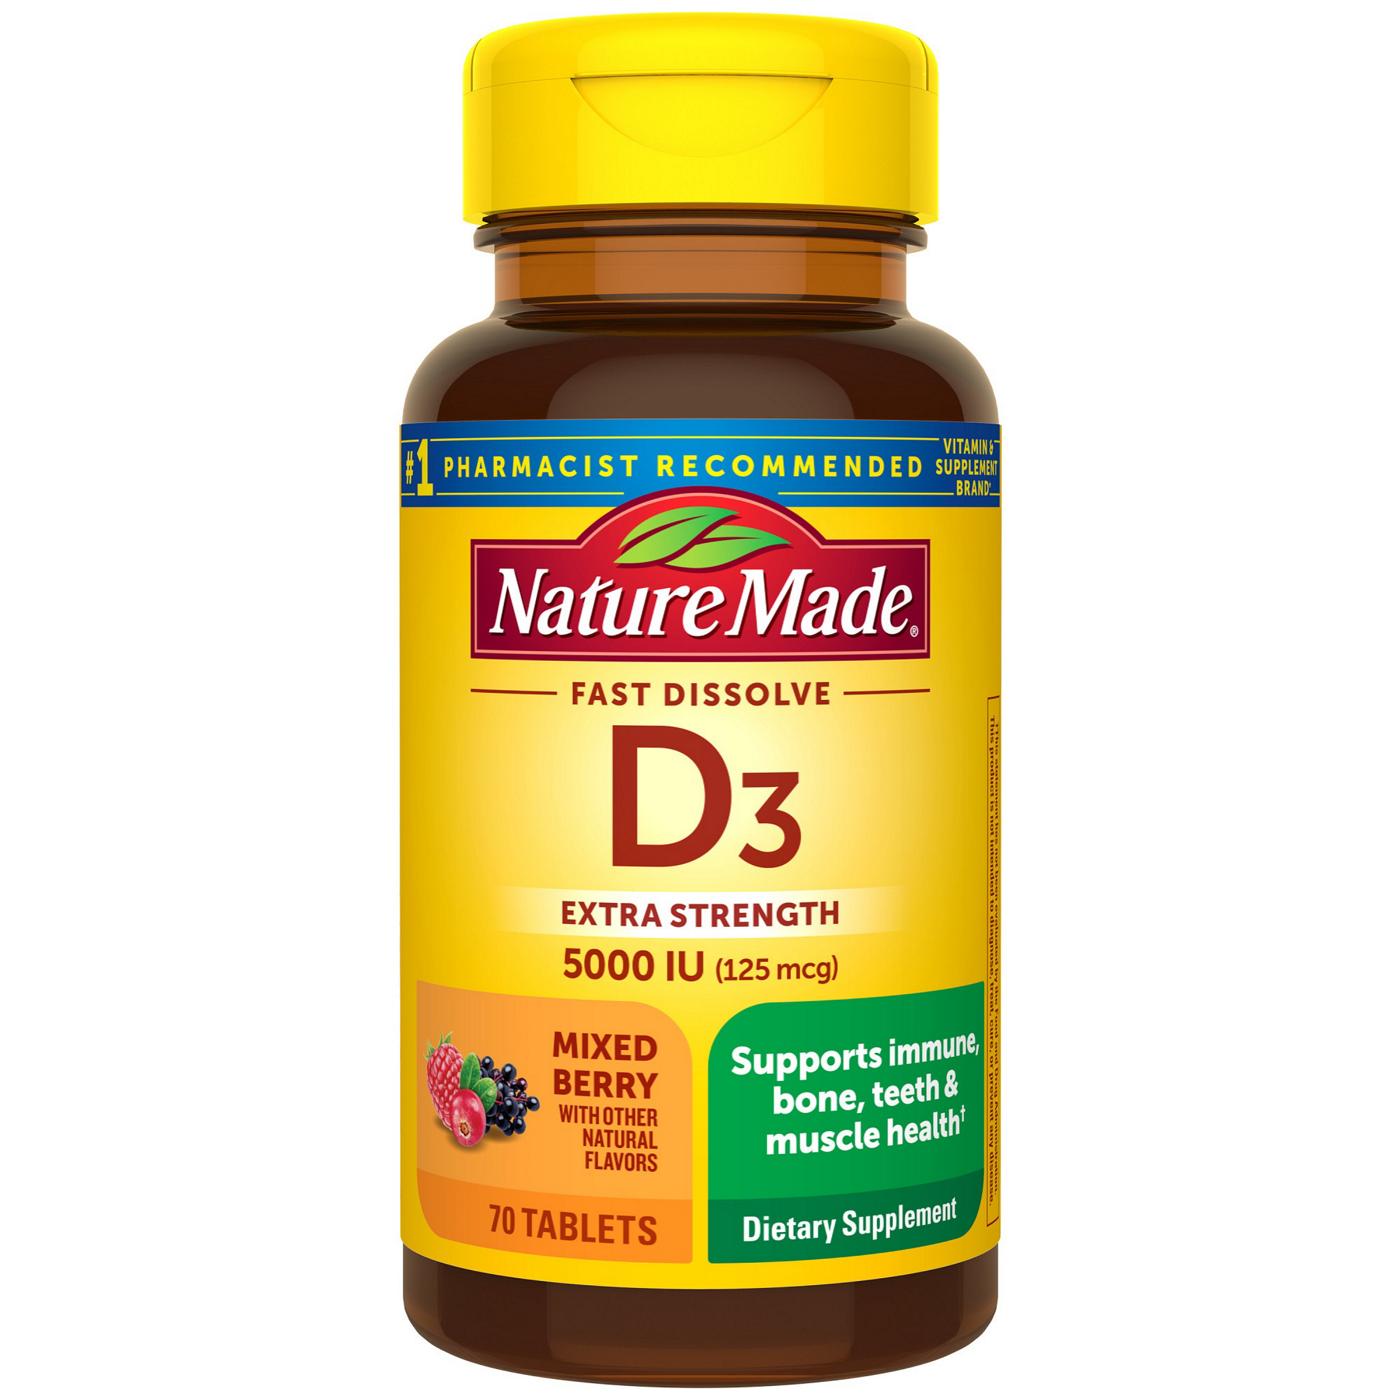 Nature Made Fast Dissolve Vitamin D3 Tablets - 5000 IU; image 1 of 2